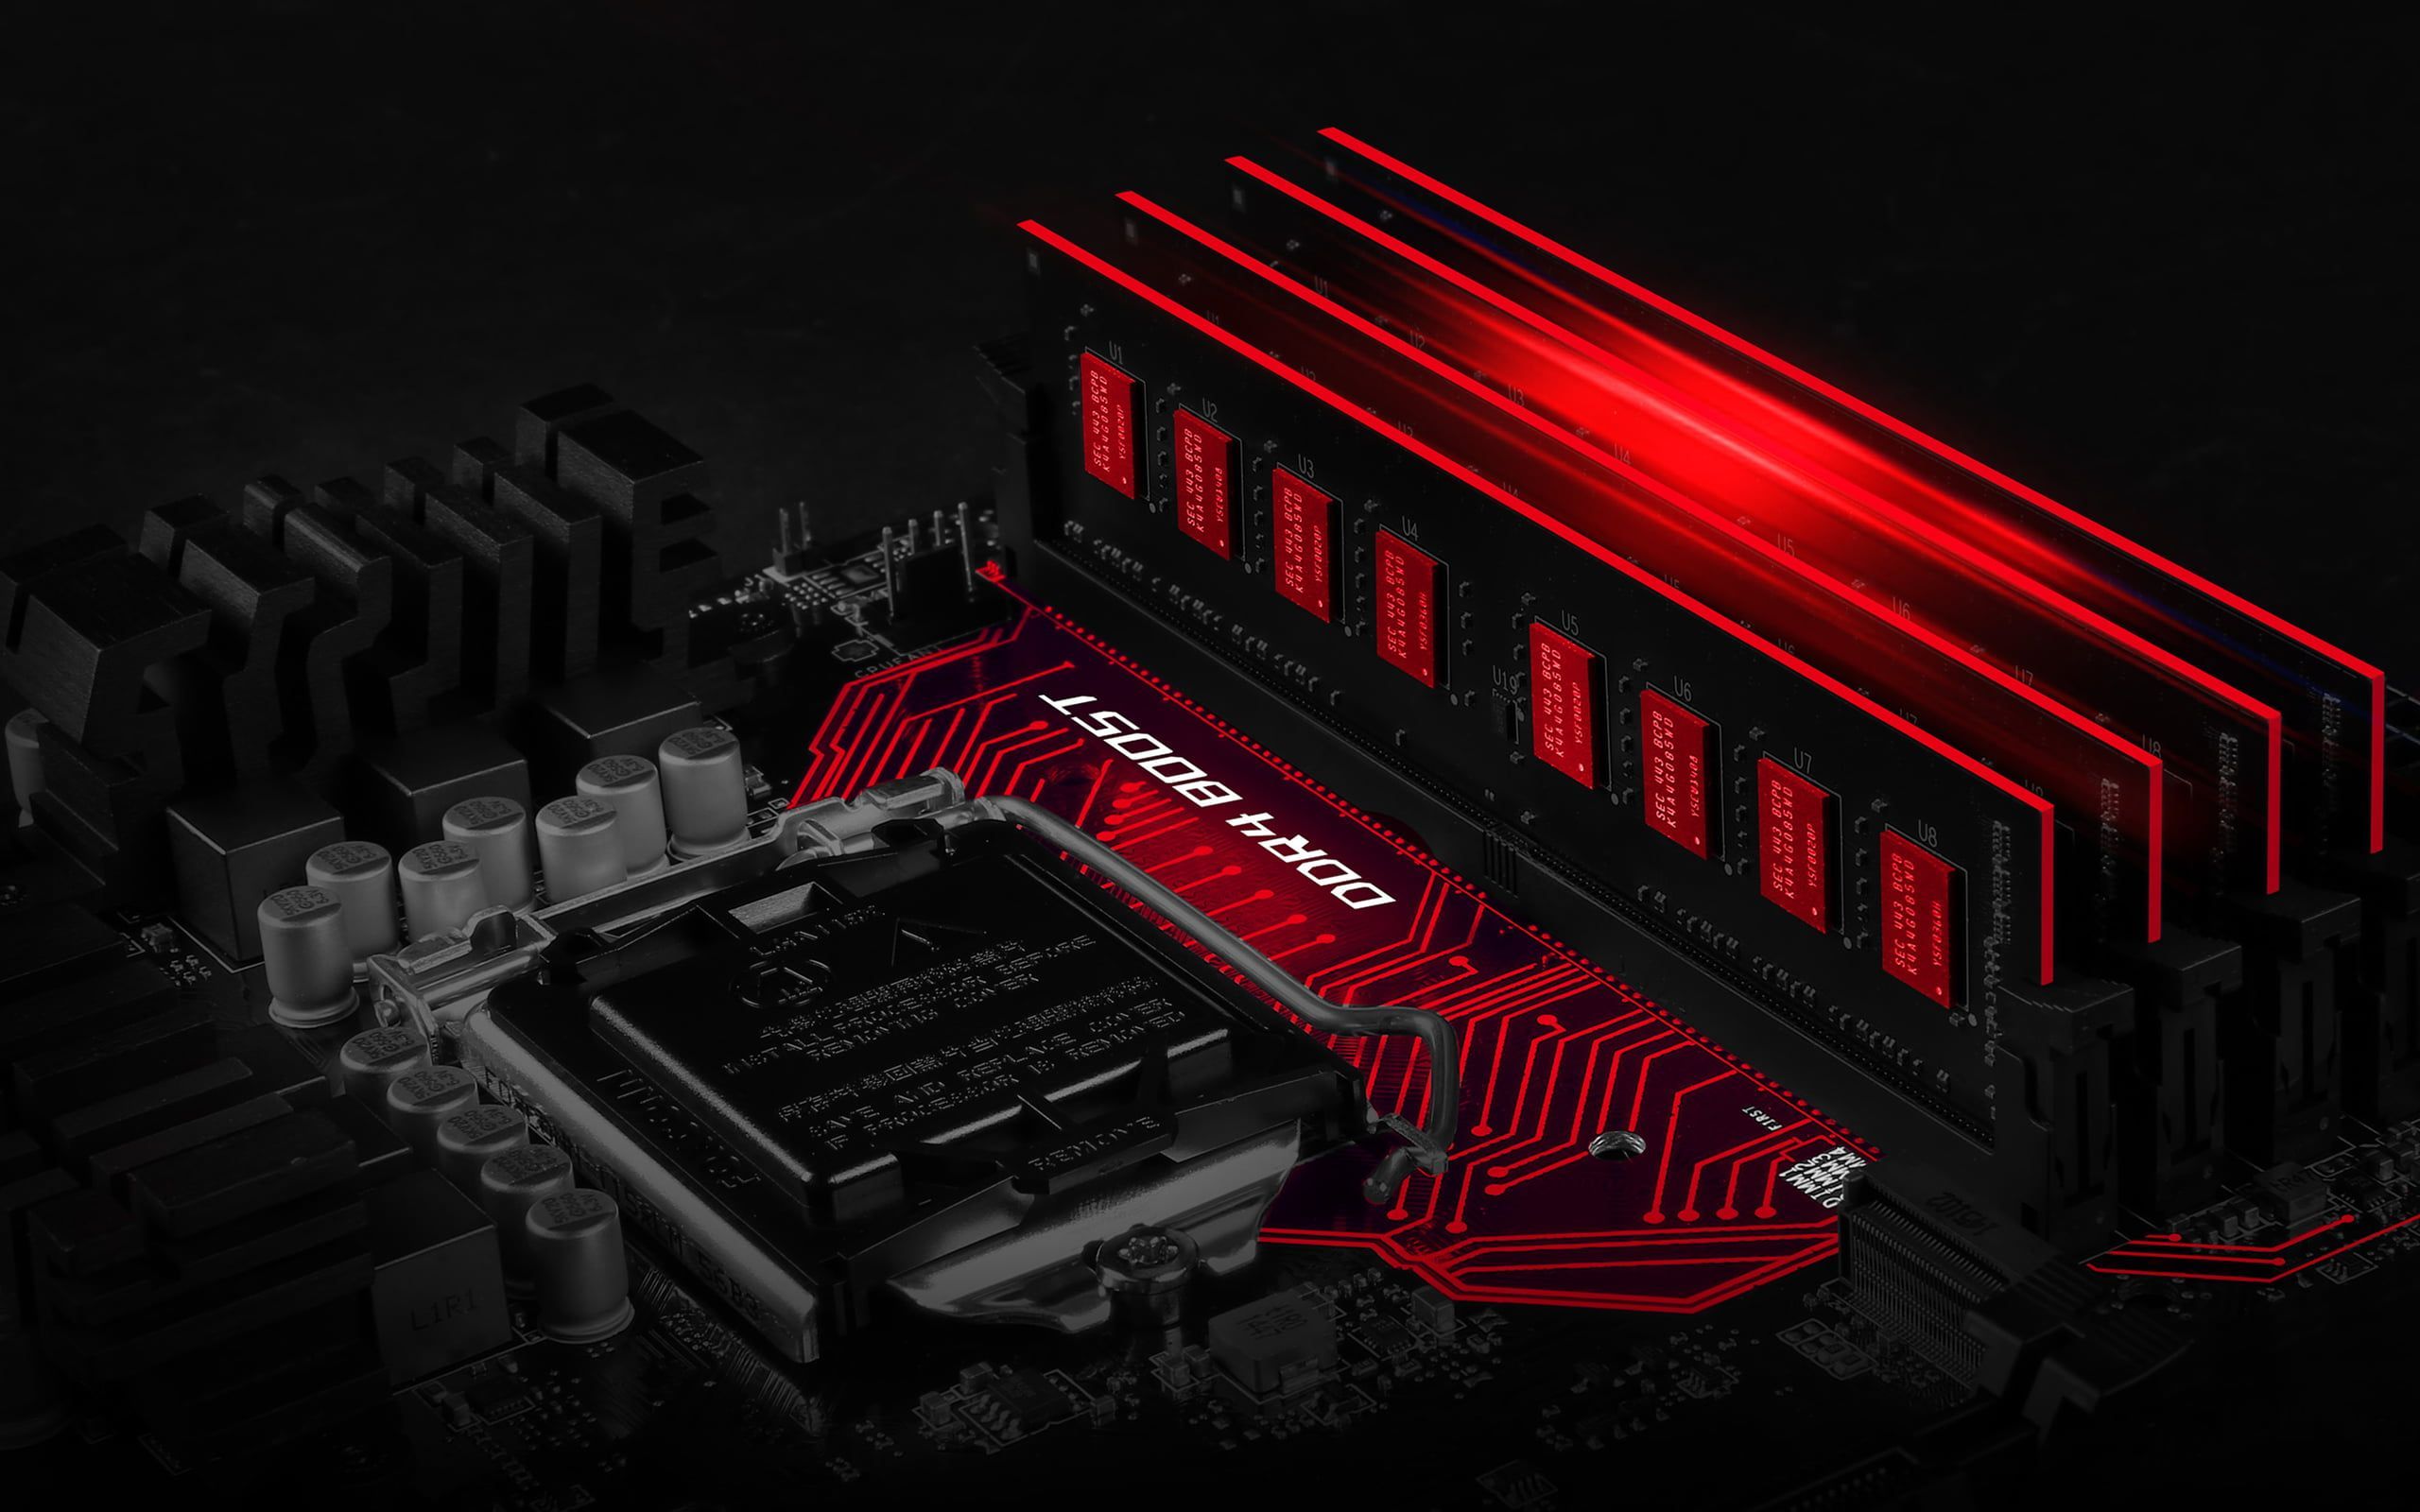 black and red motherboard PC gaming #motherboards #MSI #computer #technology RAM (Computing) K #wallpaper #hdwallp. Computer wallpaper hd, Best ram, Motherboard